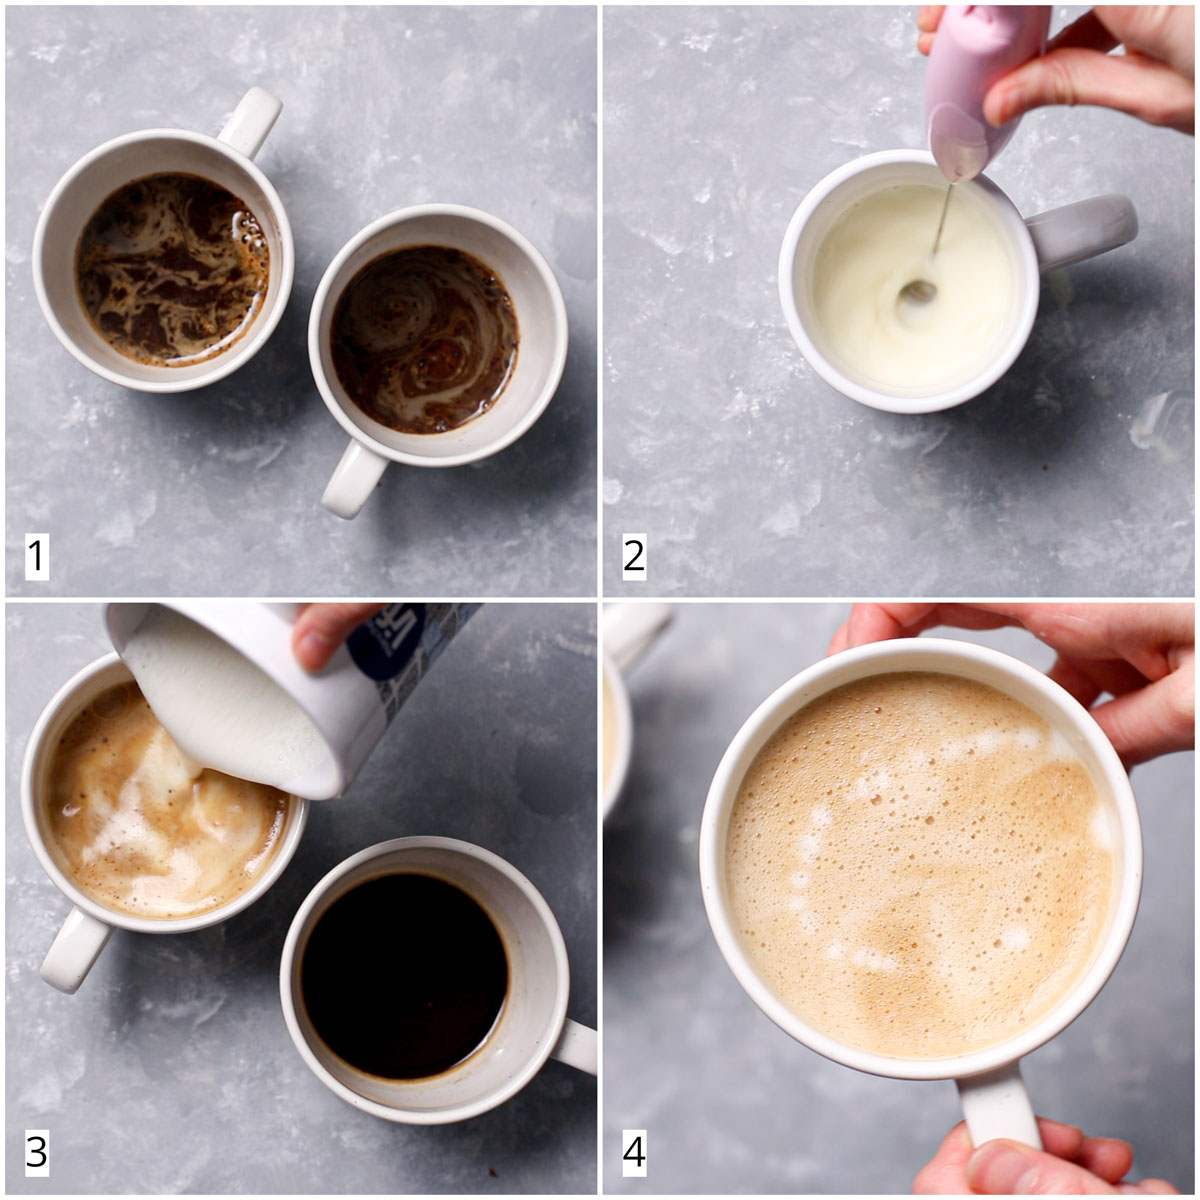 A collage of four images showing four steps in making oat milk latte at home.